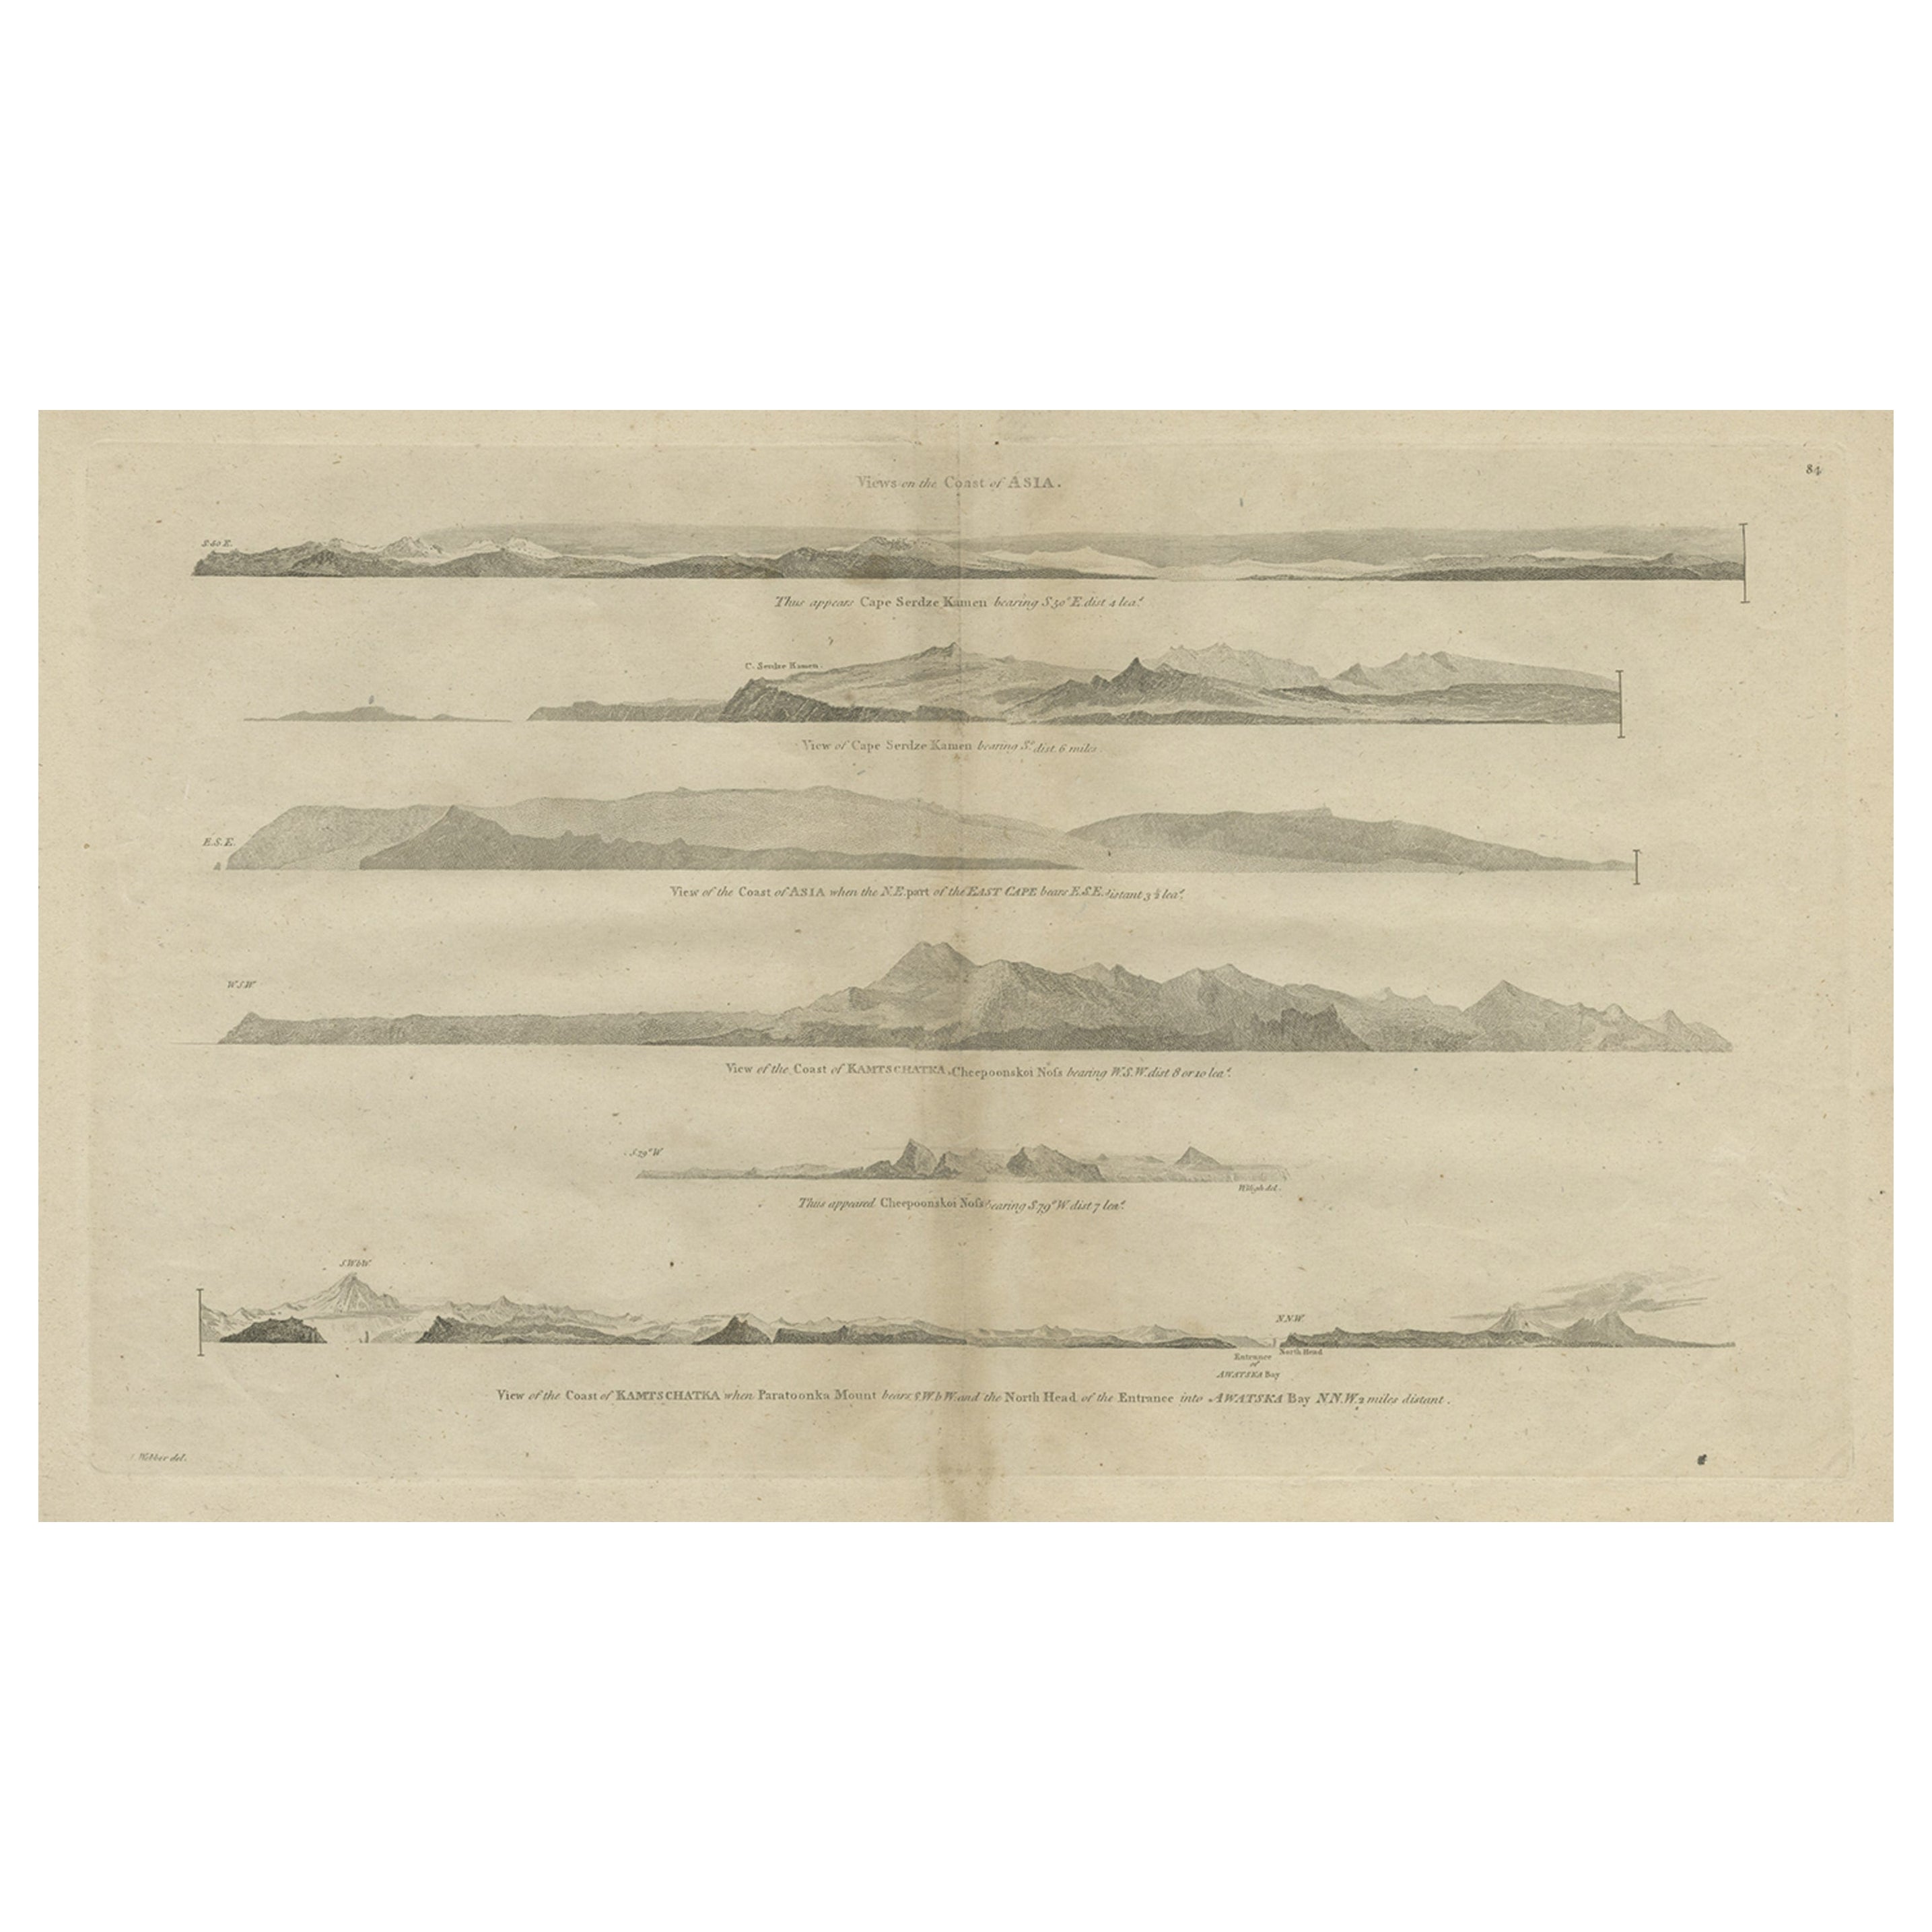 Antique Print with Coastal Views of Asia by Cook, c.1784